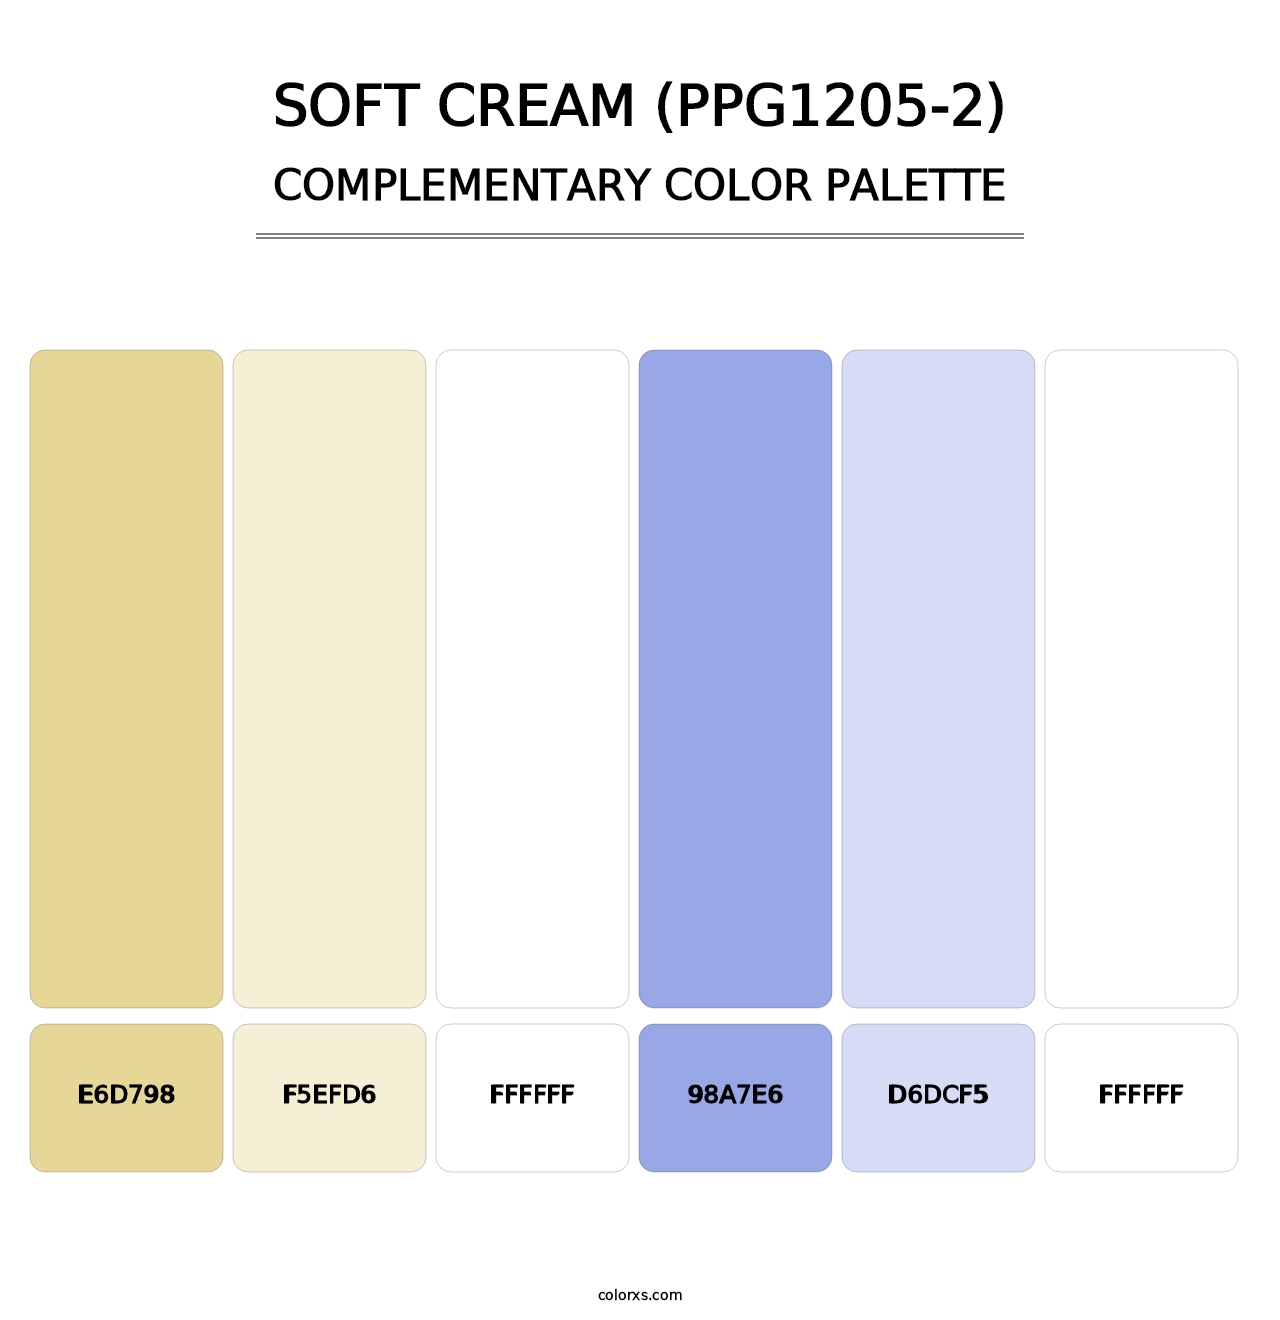 Soft Cream (PPG1205-2) - Complementary Color Palette